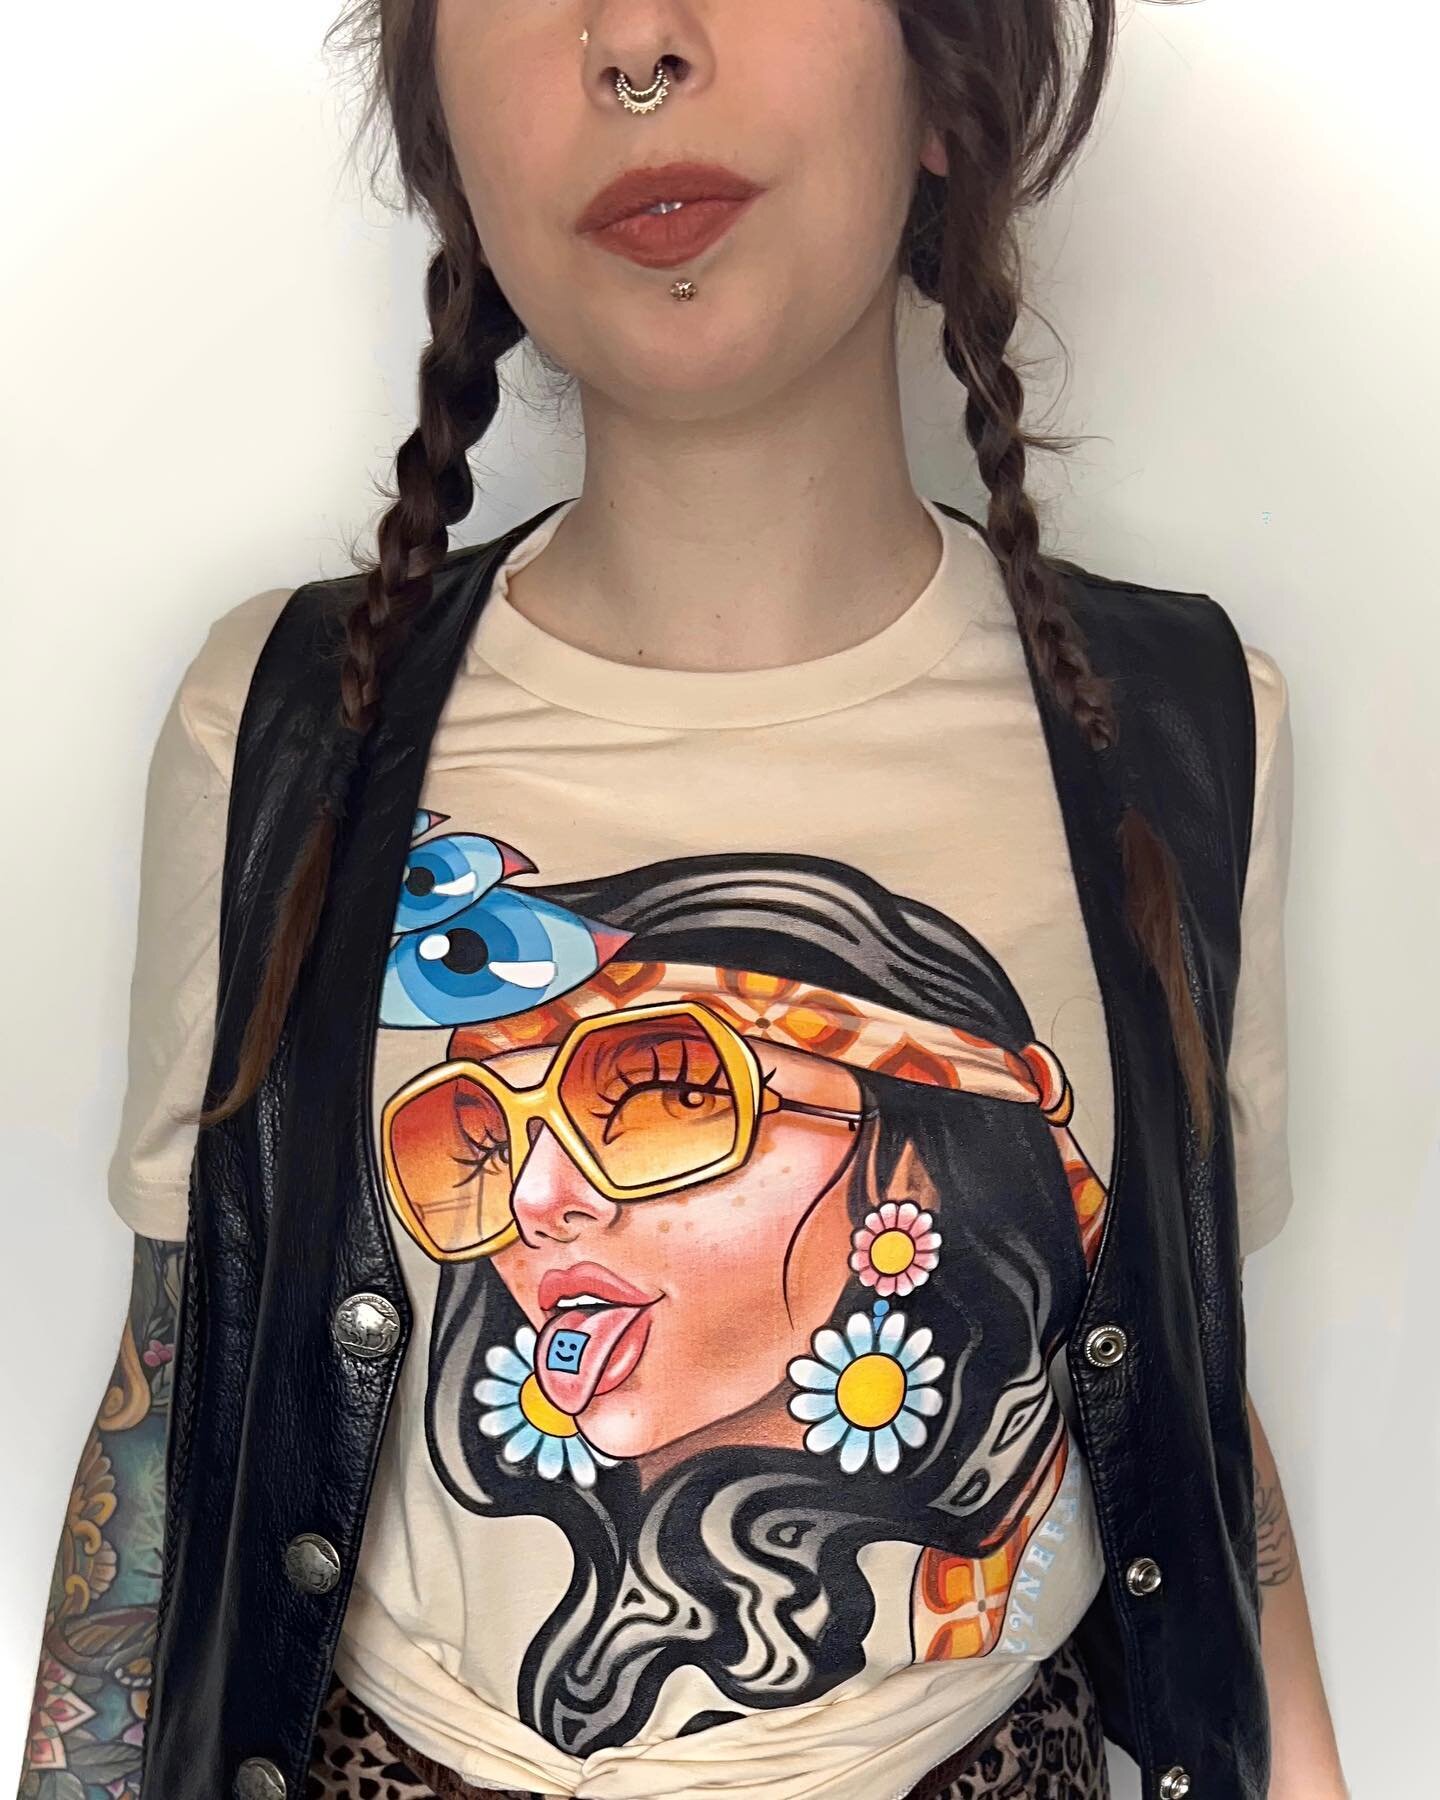 My spring/summer merch line is live on my website! This Psychedelic lover Tee, along with towels, gym bags, bucket hats and pint shaker glasses are all available at catlynefableartwork.com. I am blown away with the quality of each of these items. All